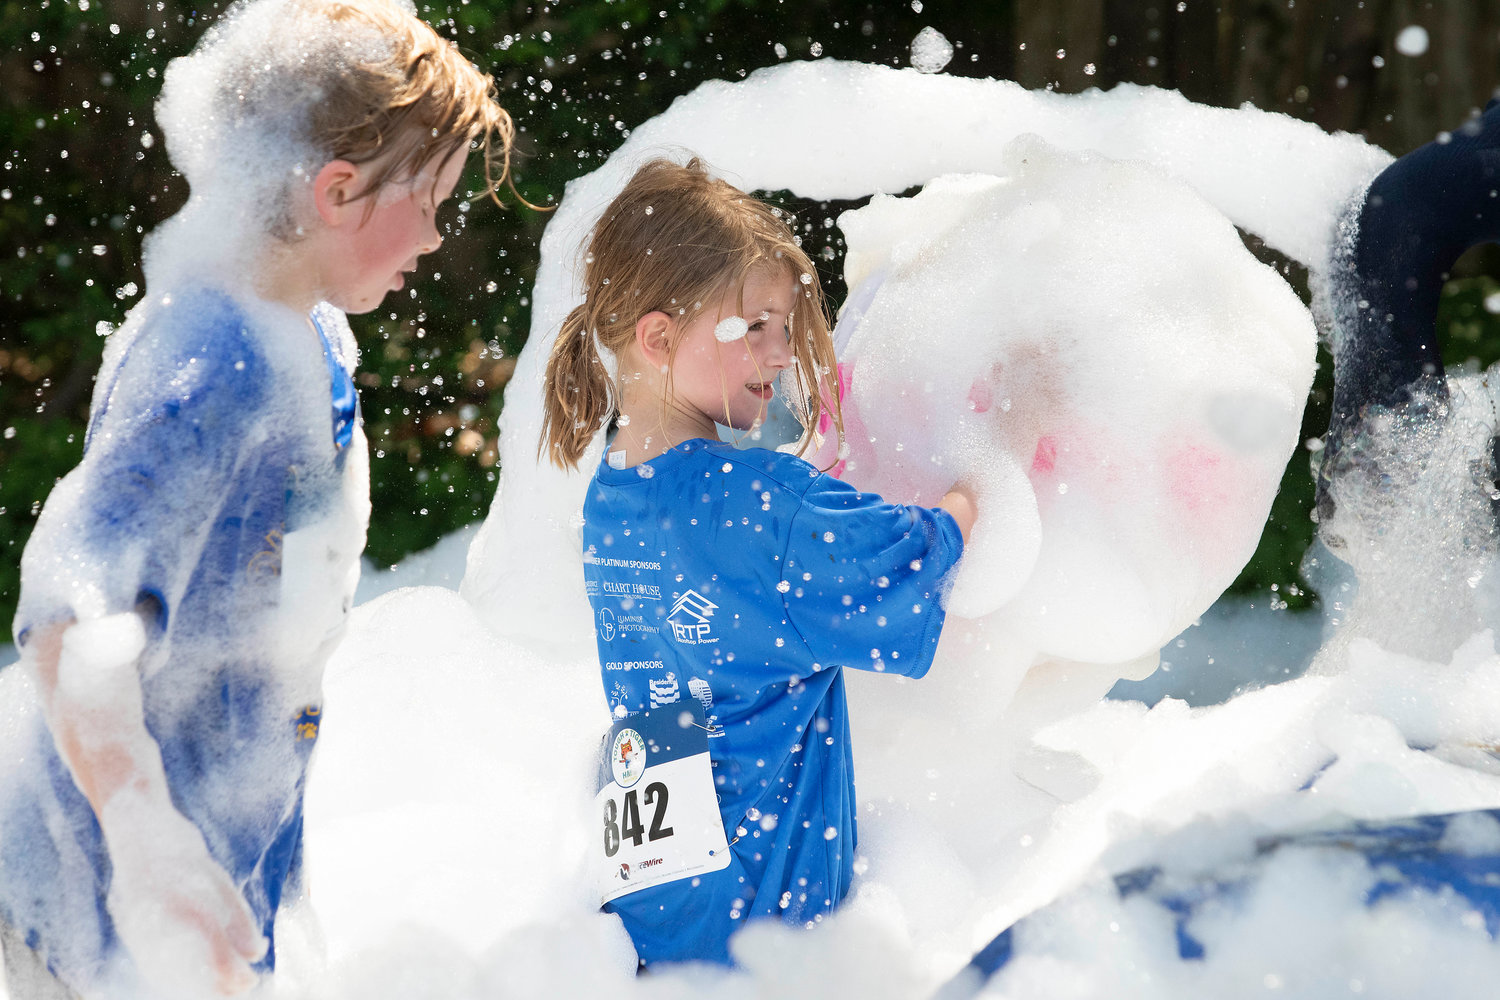 A Tough Tiger competitor plays in the bubbles near the finish of this year’s race.